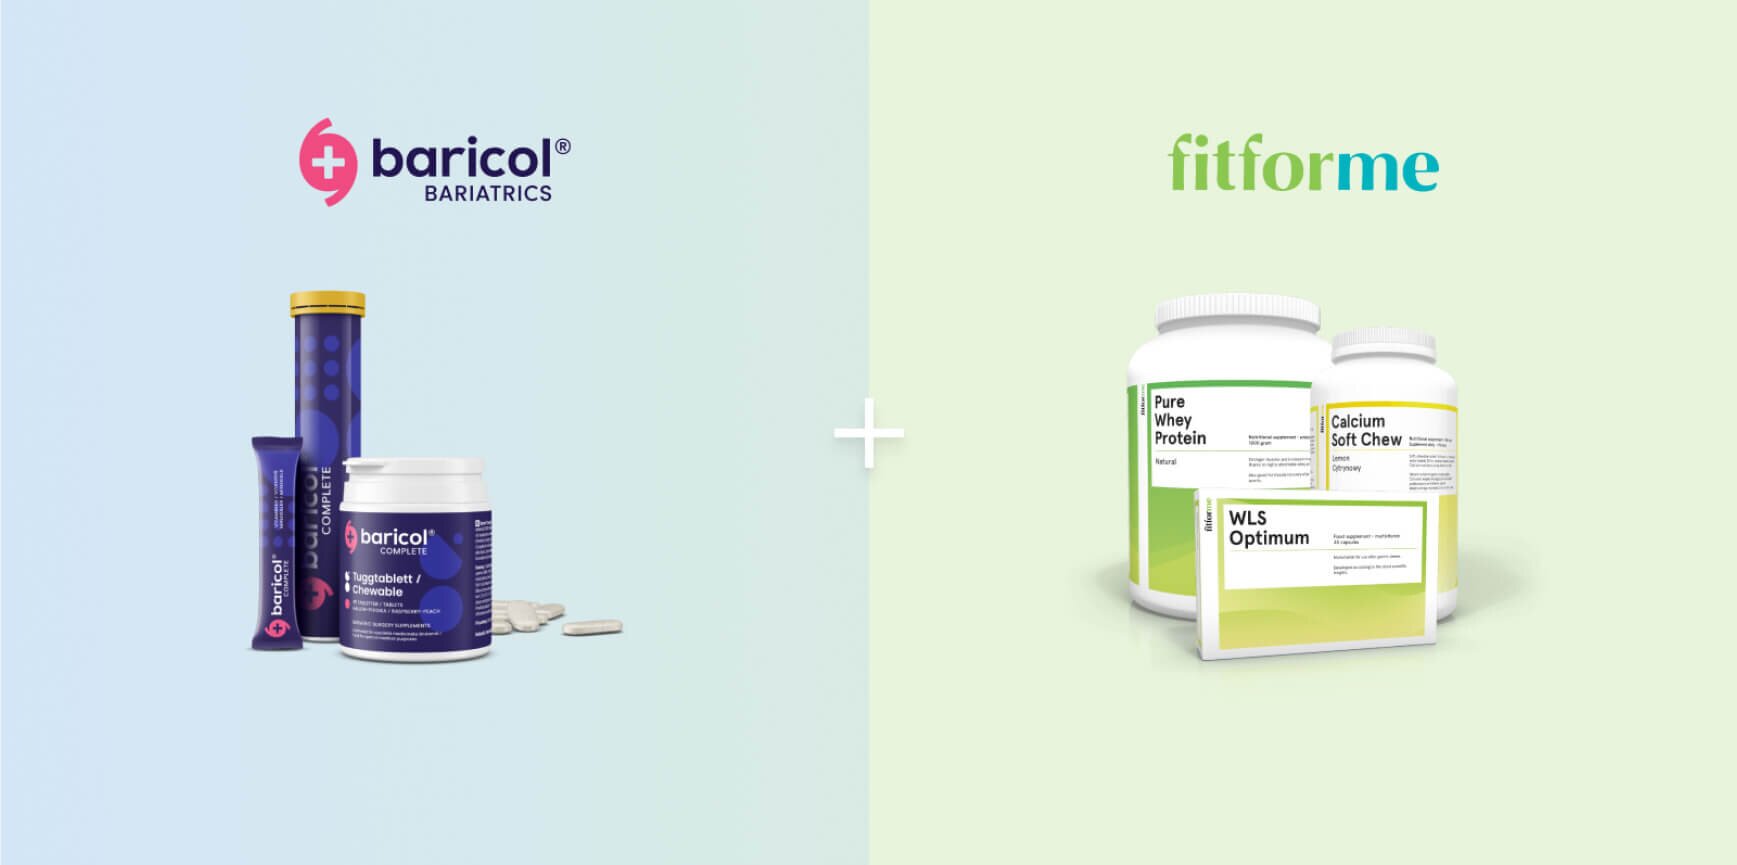 Baricol joins FitForMe